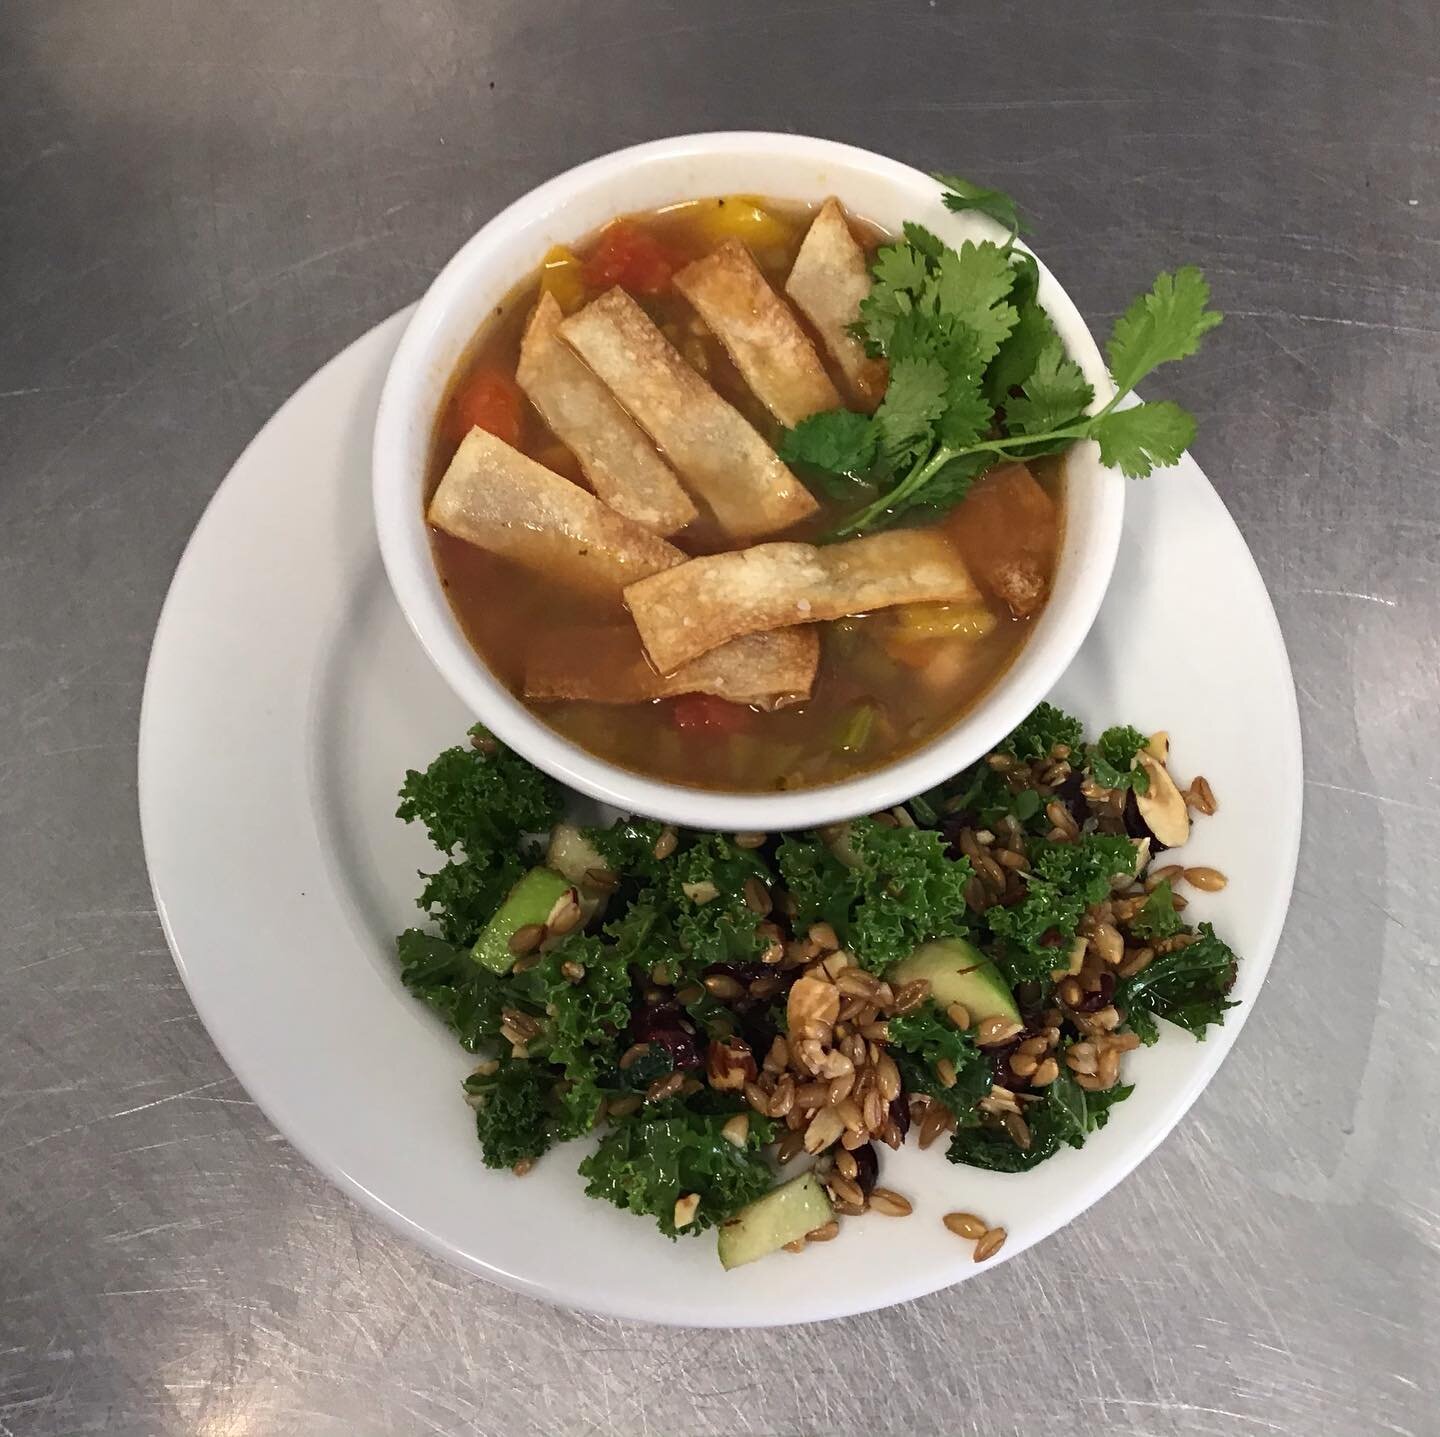 Good morning☀️
We hope you all had a great weekend!
Come in and grab a bowl of our yummy veggie tortilla soup to warm you up🤤🤗
We also have or loaded farro salad available for lunch!